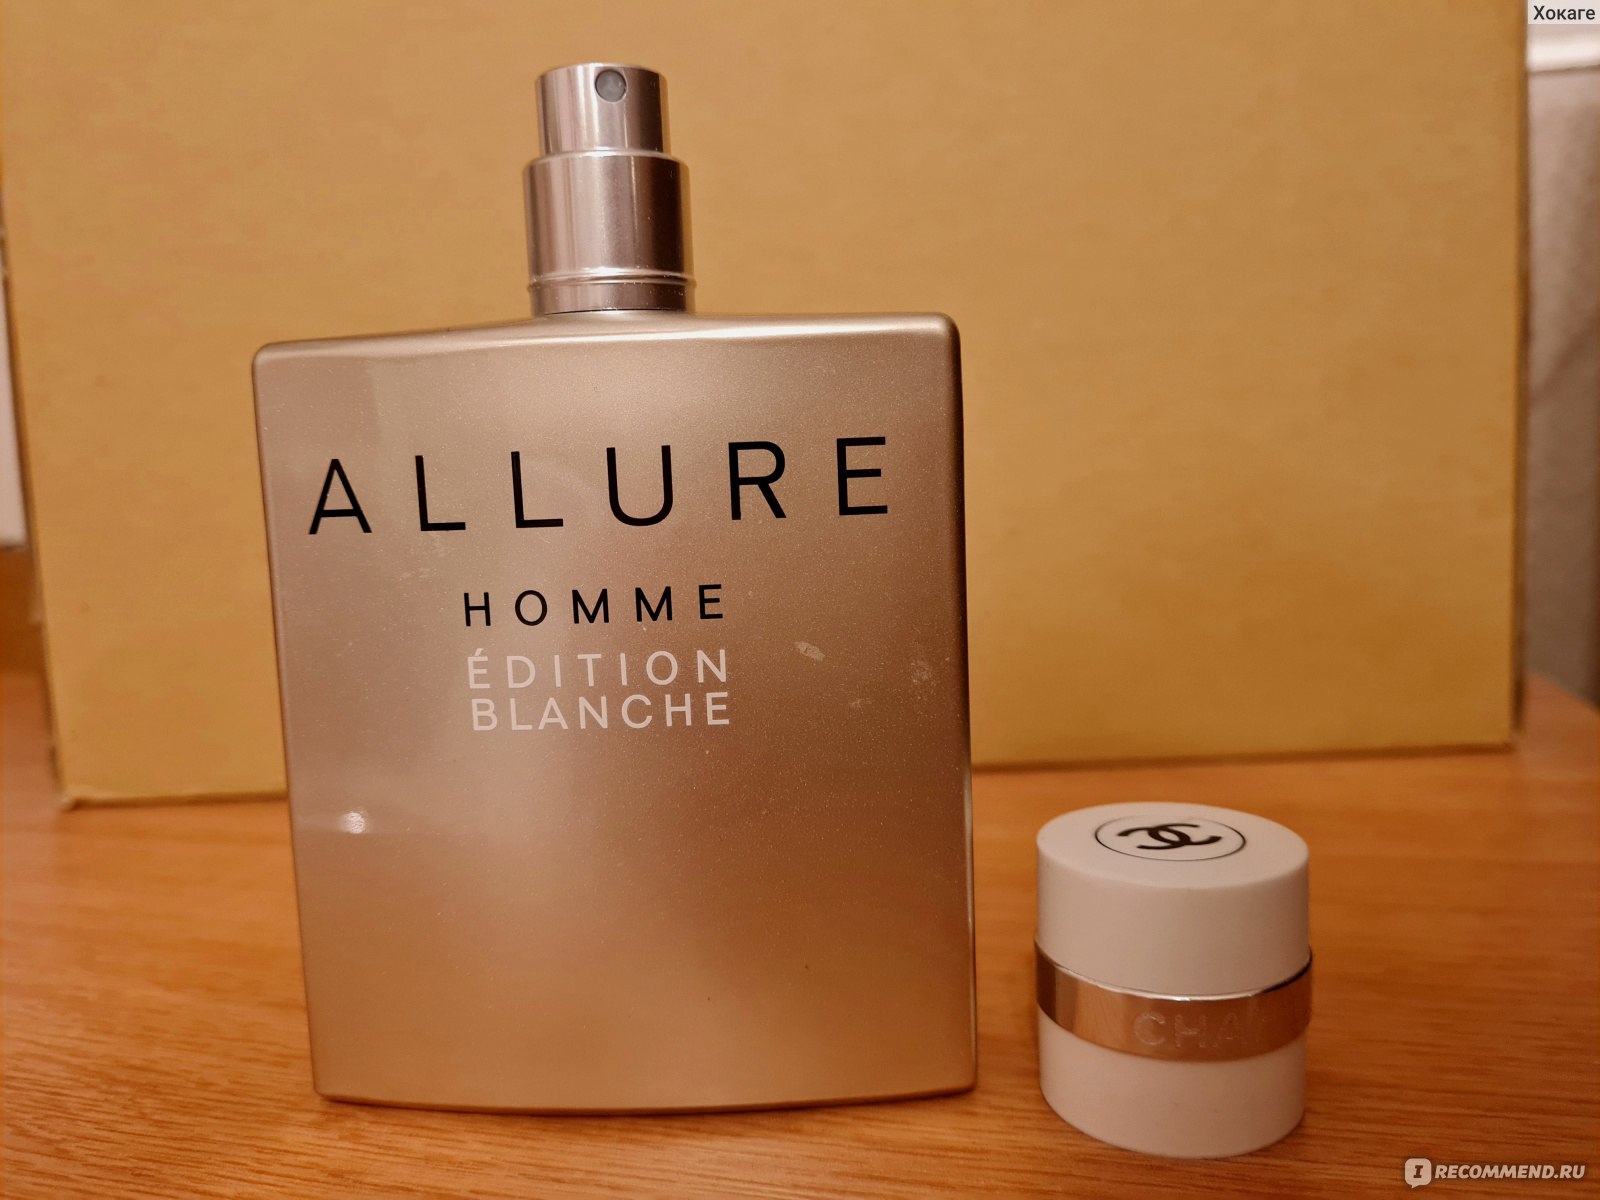 Chanel allure homme blanche. Парфюмерная вода Chanel Allure homme Edition Blanche. Chanel Allure homme Edition Blanche парфюмерная вода 100мл. Chanel мужские. Allure homme Edition Blanche 150ml. Chanel мужс. Allure homme Edition Blanche 150 ml.